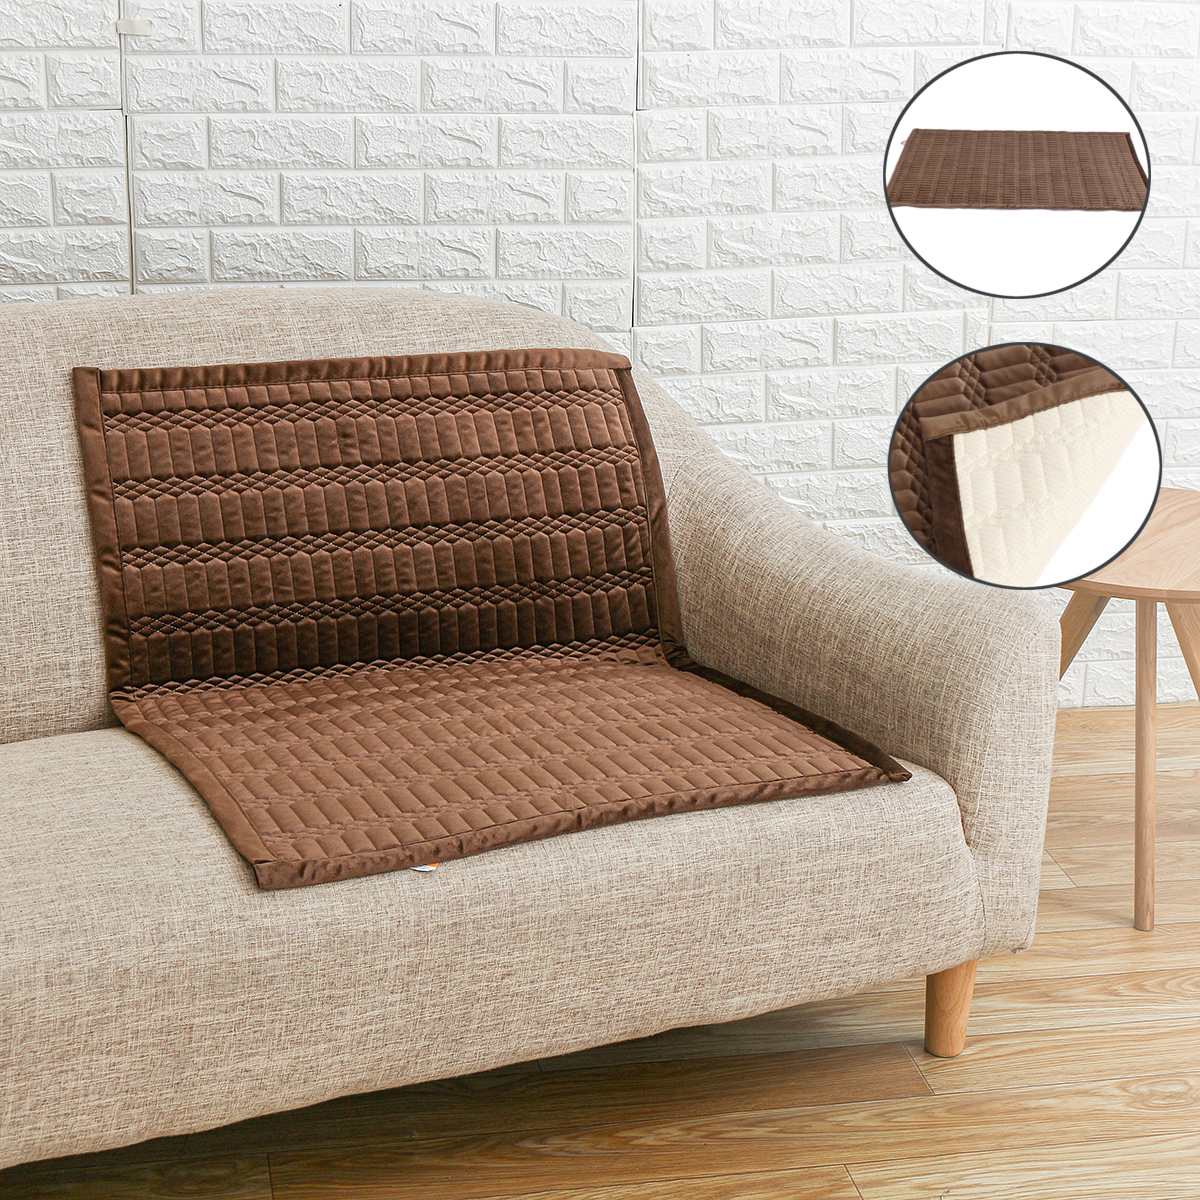 

Universal Seater Slipcover Sofa Pad Cover Towel Protective Furniture Decor Brown